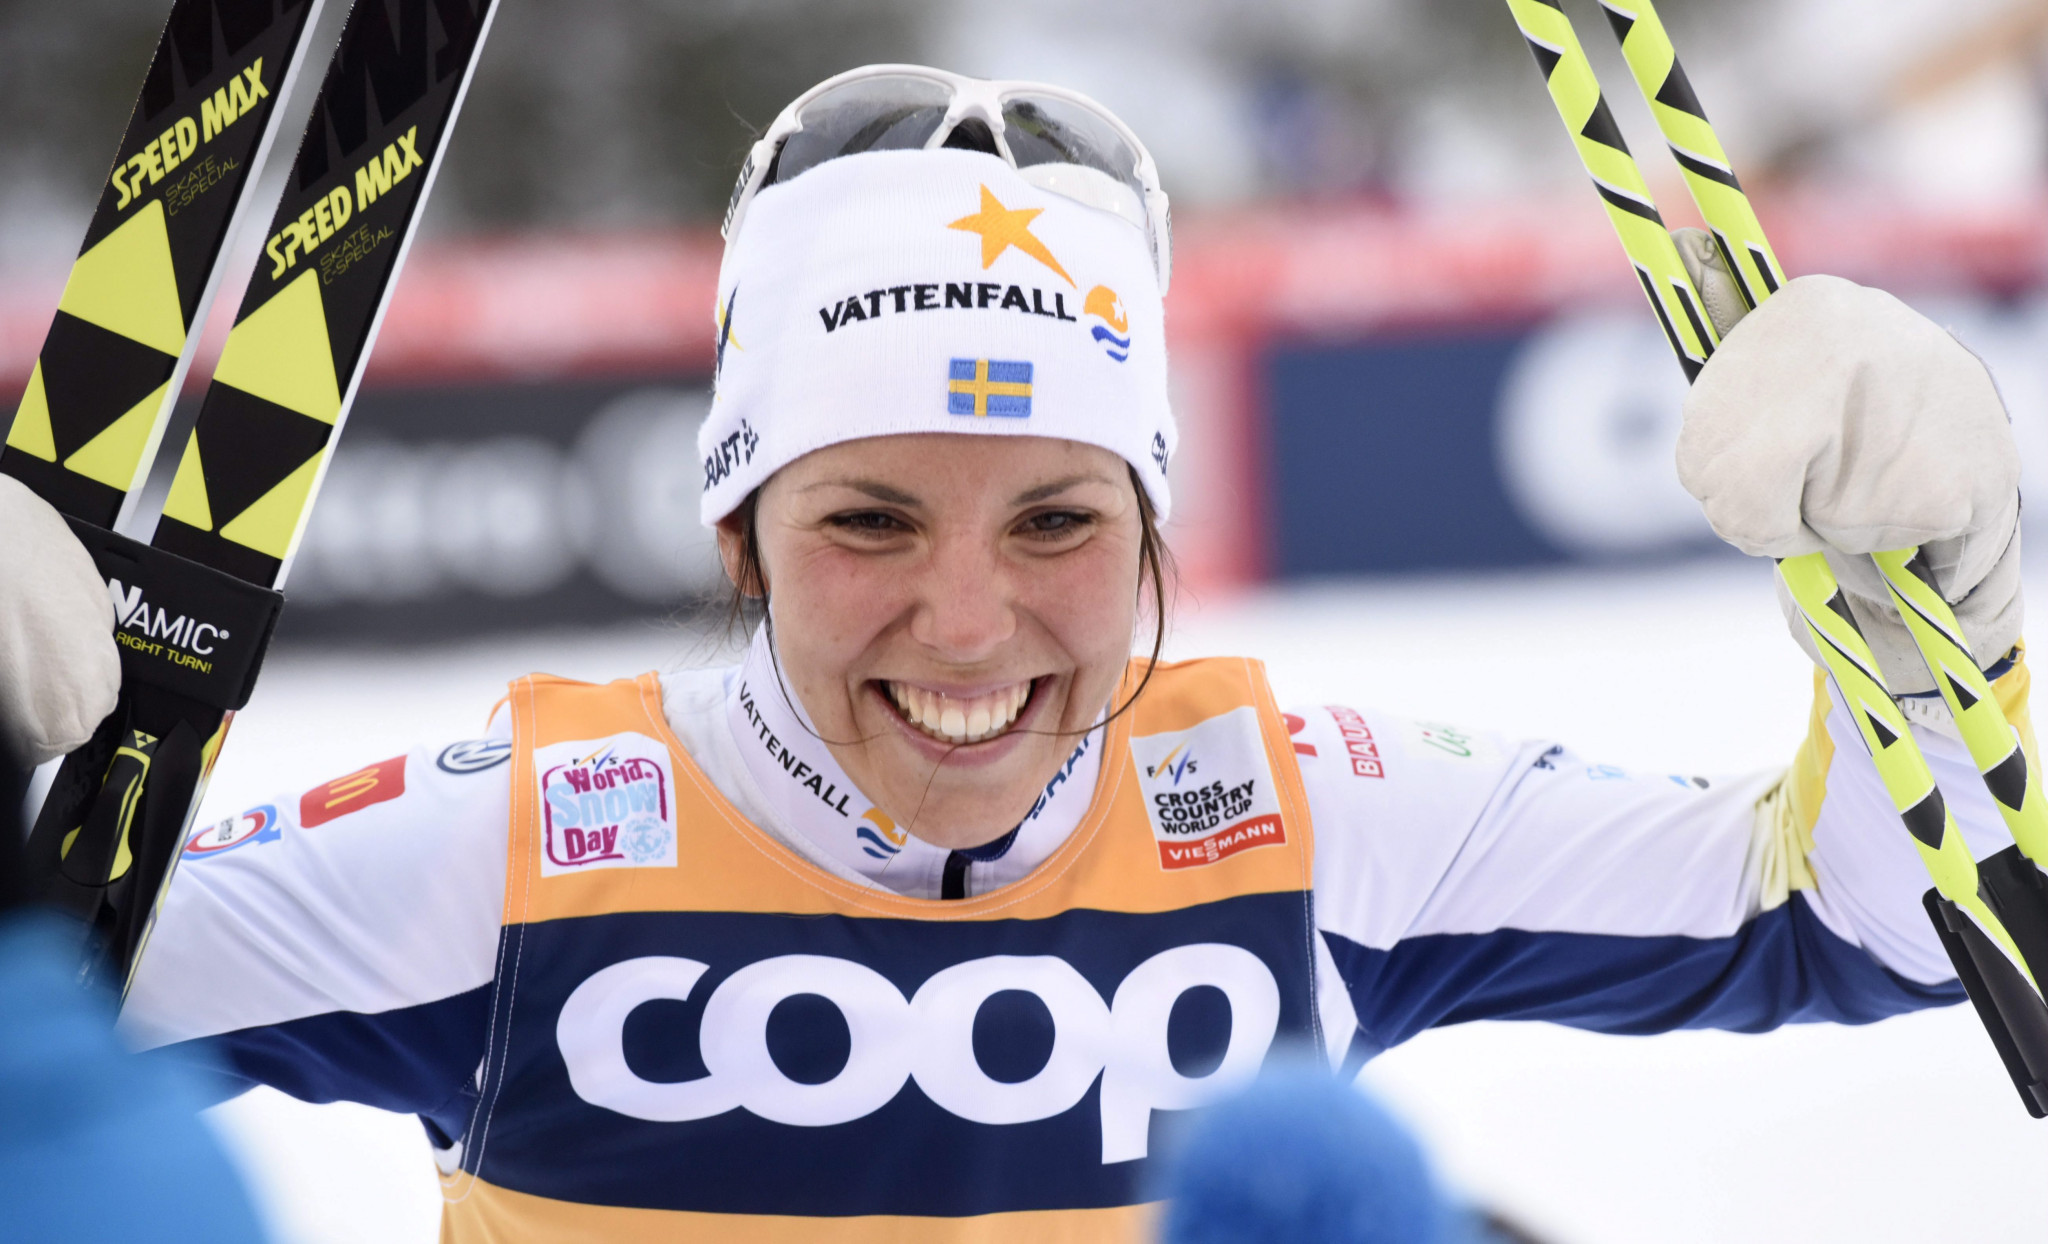 Sweden's Charlotte Kalla won the women's FIS Cross-Country World Cup event in Toblach ©Getty Images